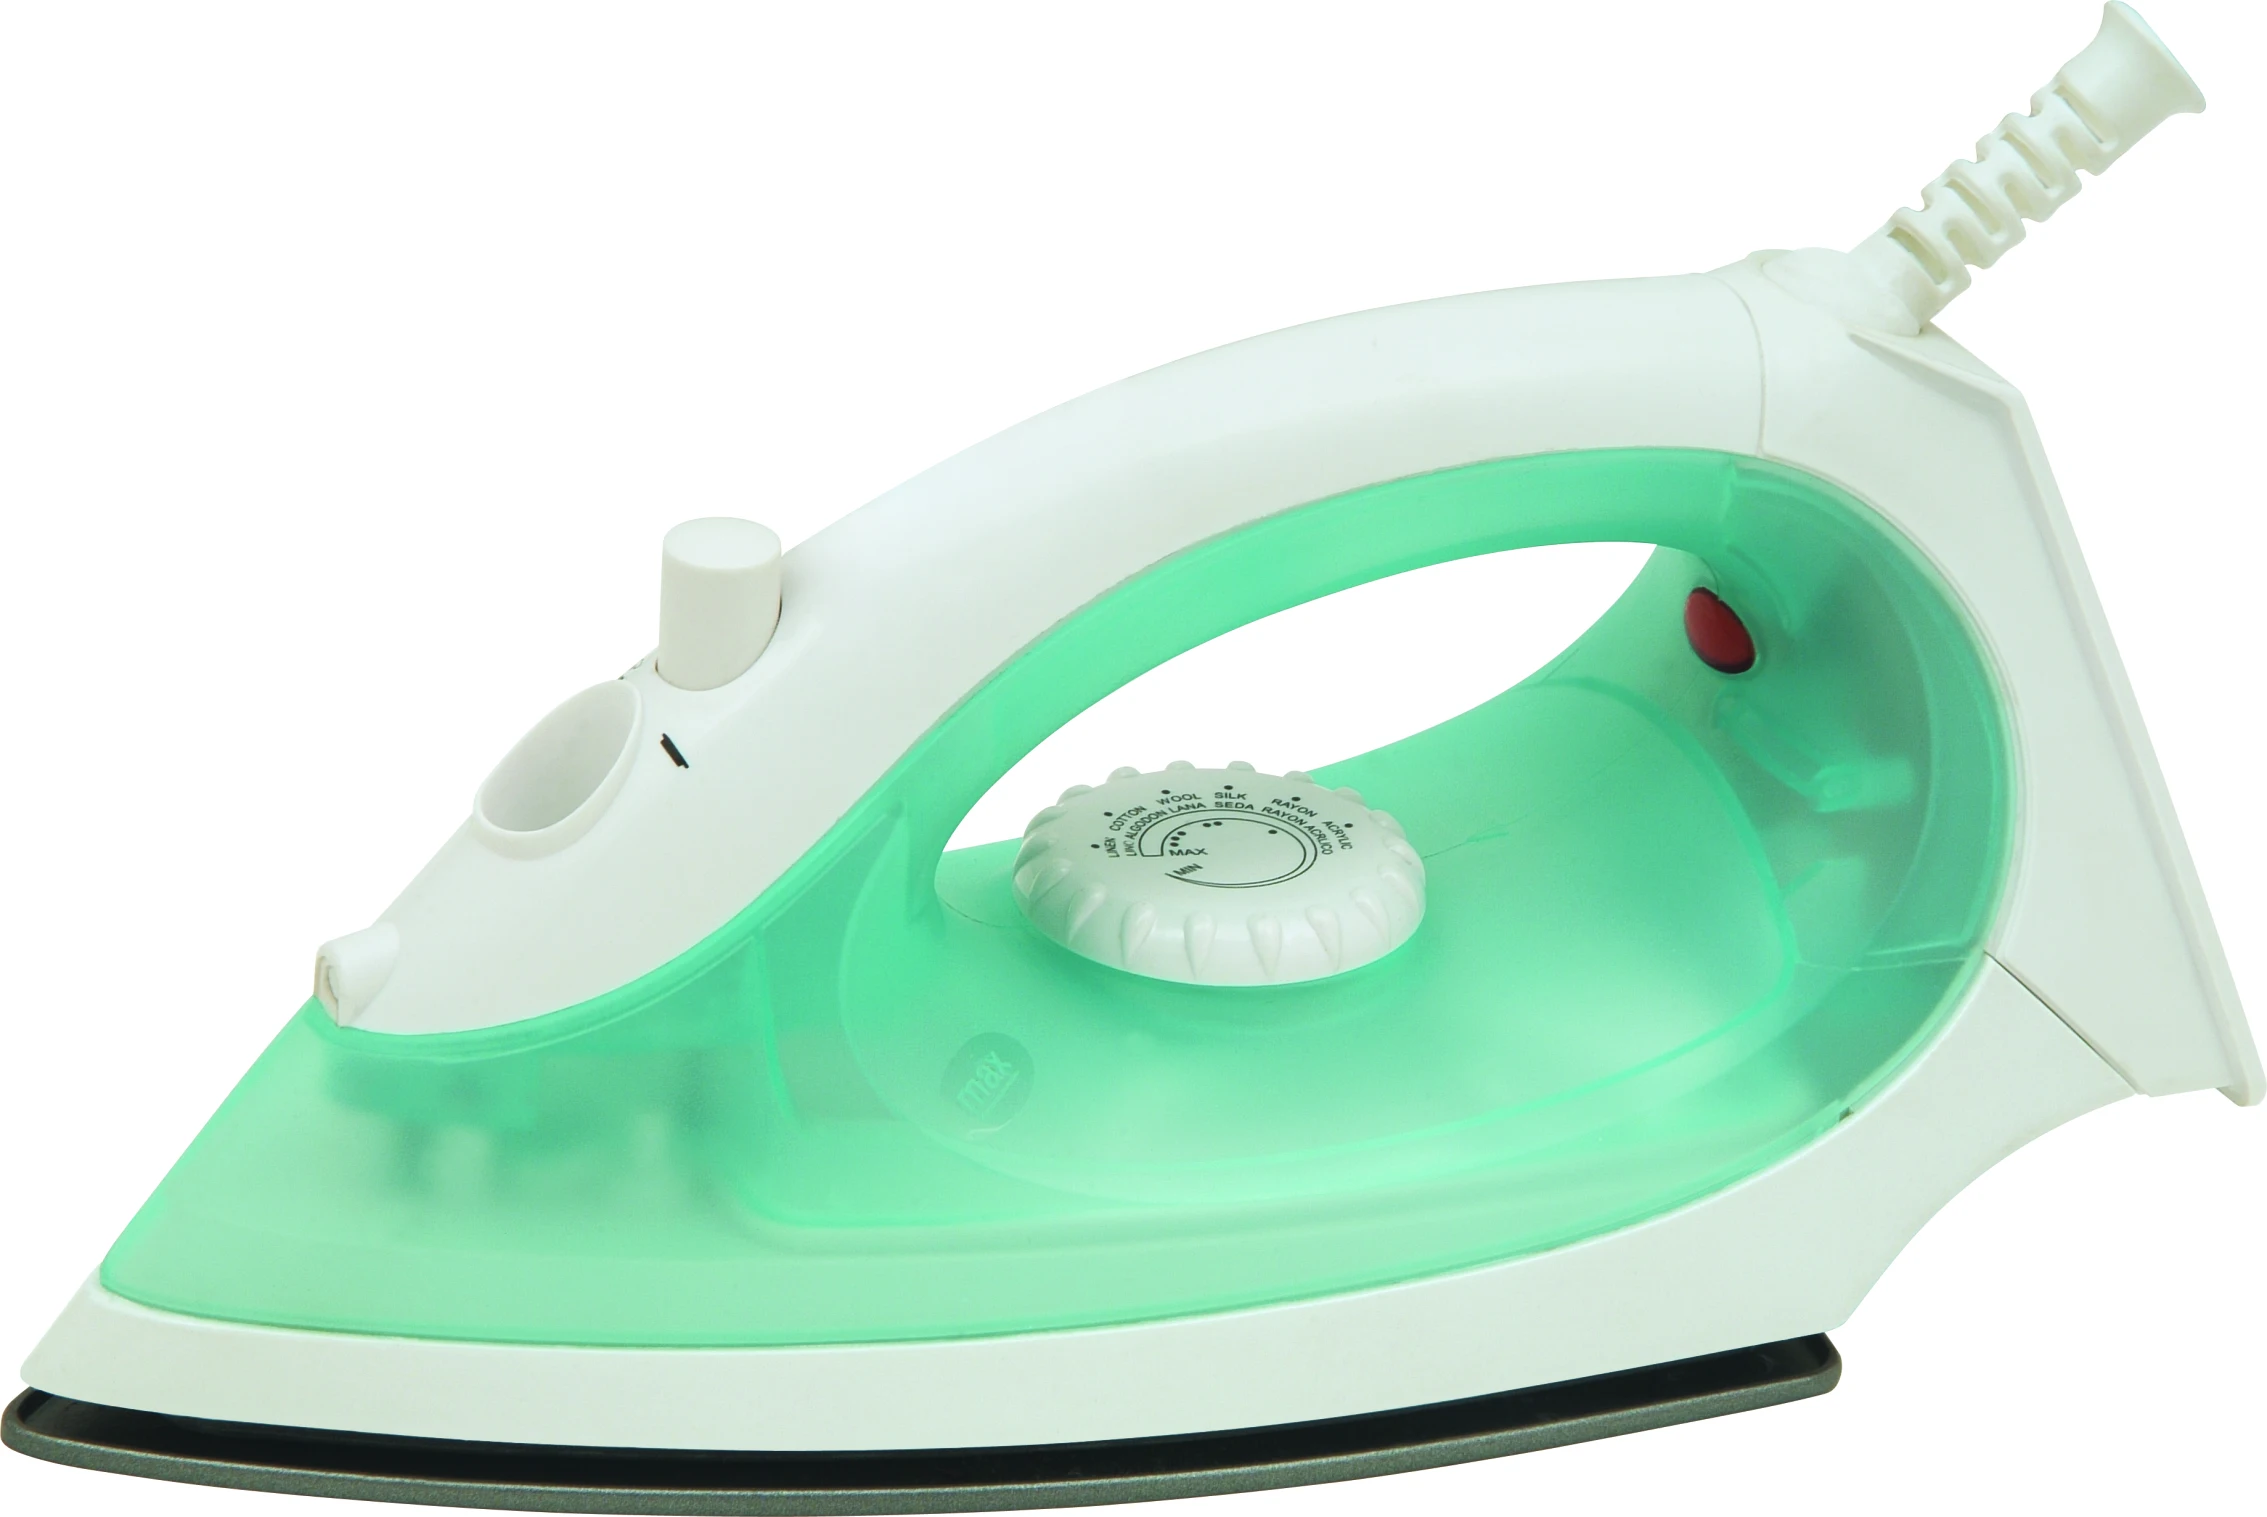 Factory Direct Supply Ce Certified Handheld Household Mini Electric Steamer Suitable For Home/office/travel